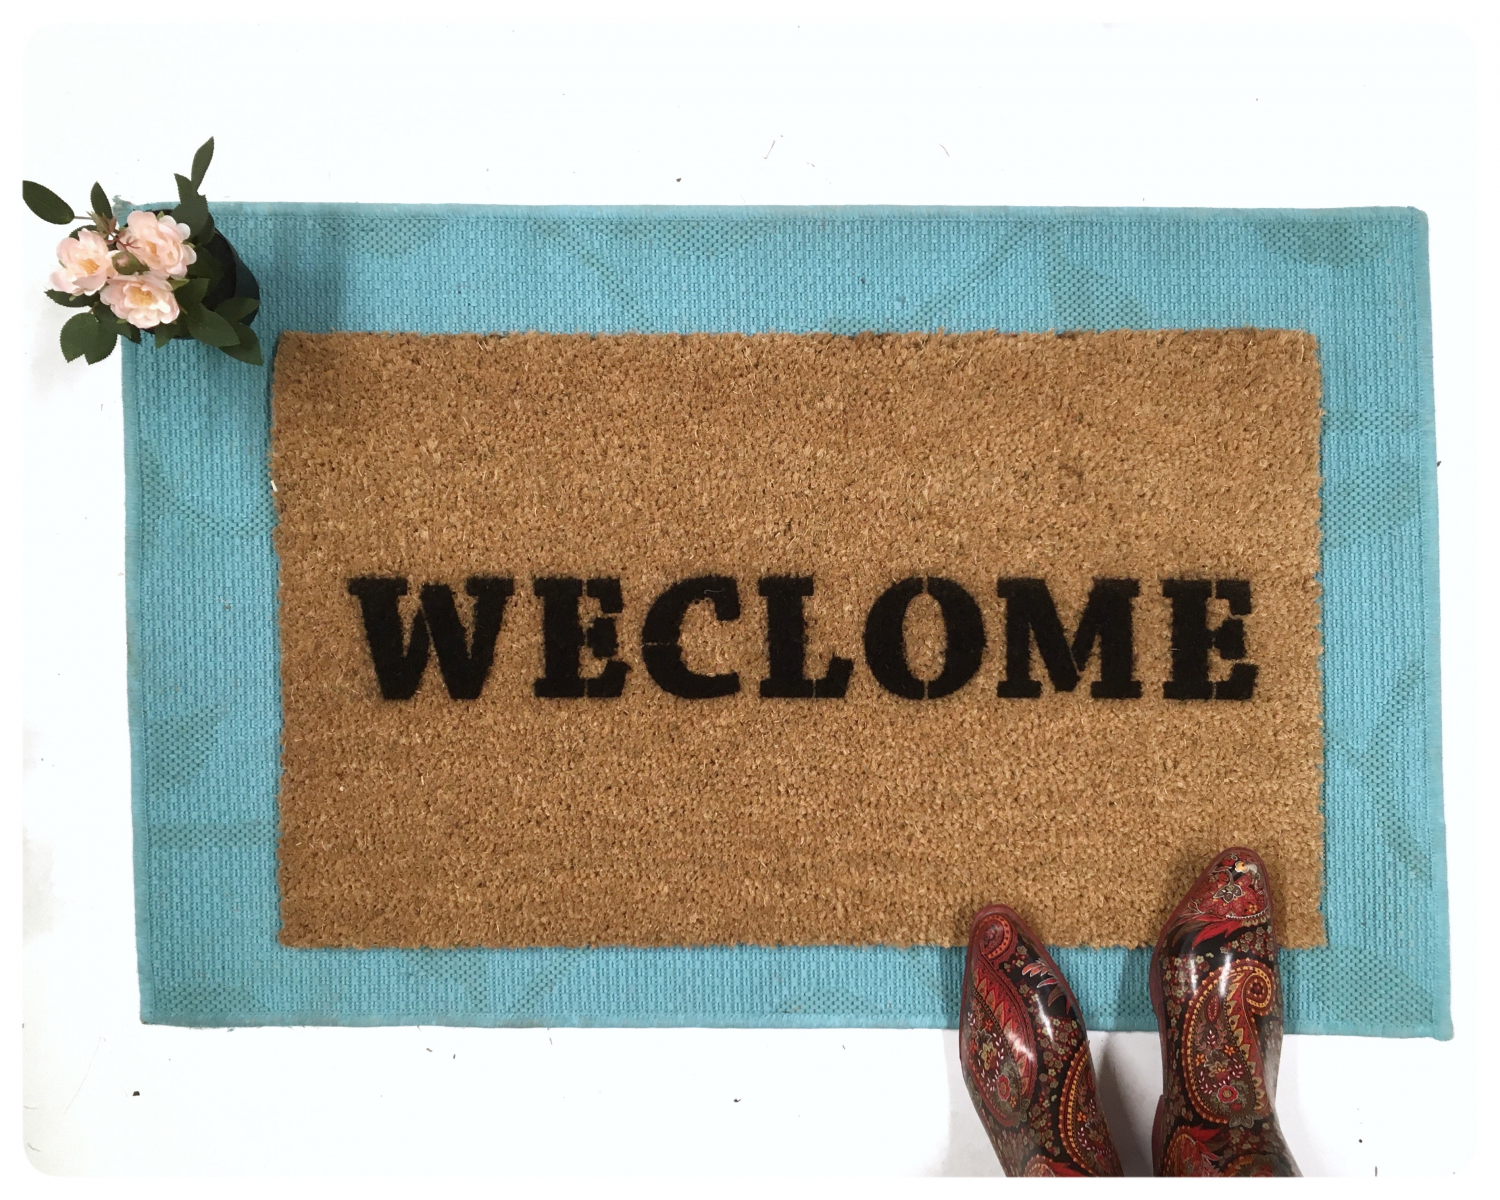 funny dyslexic weclome welcome eco friendly sustainable coconut coir natural damn good doormat